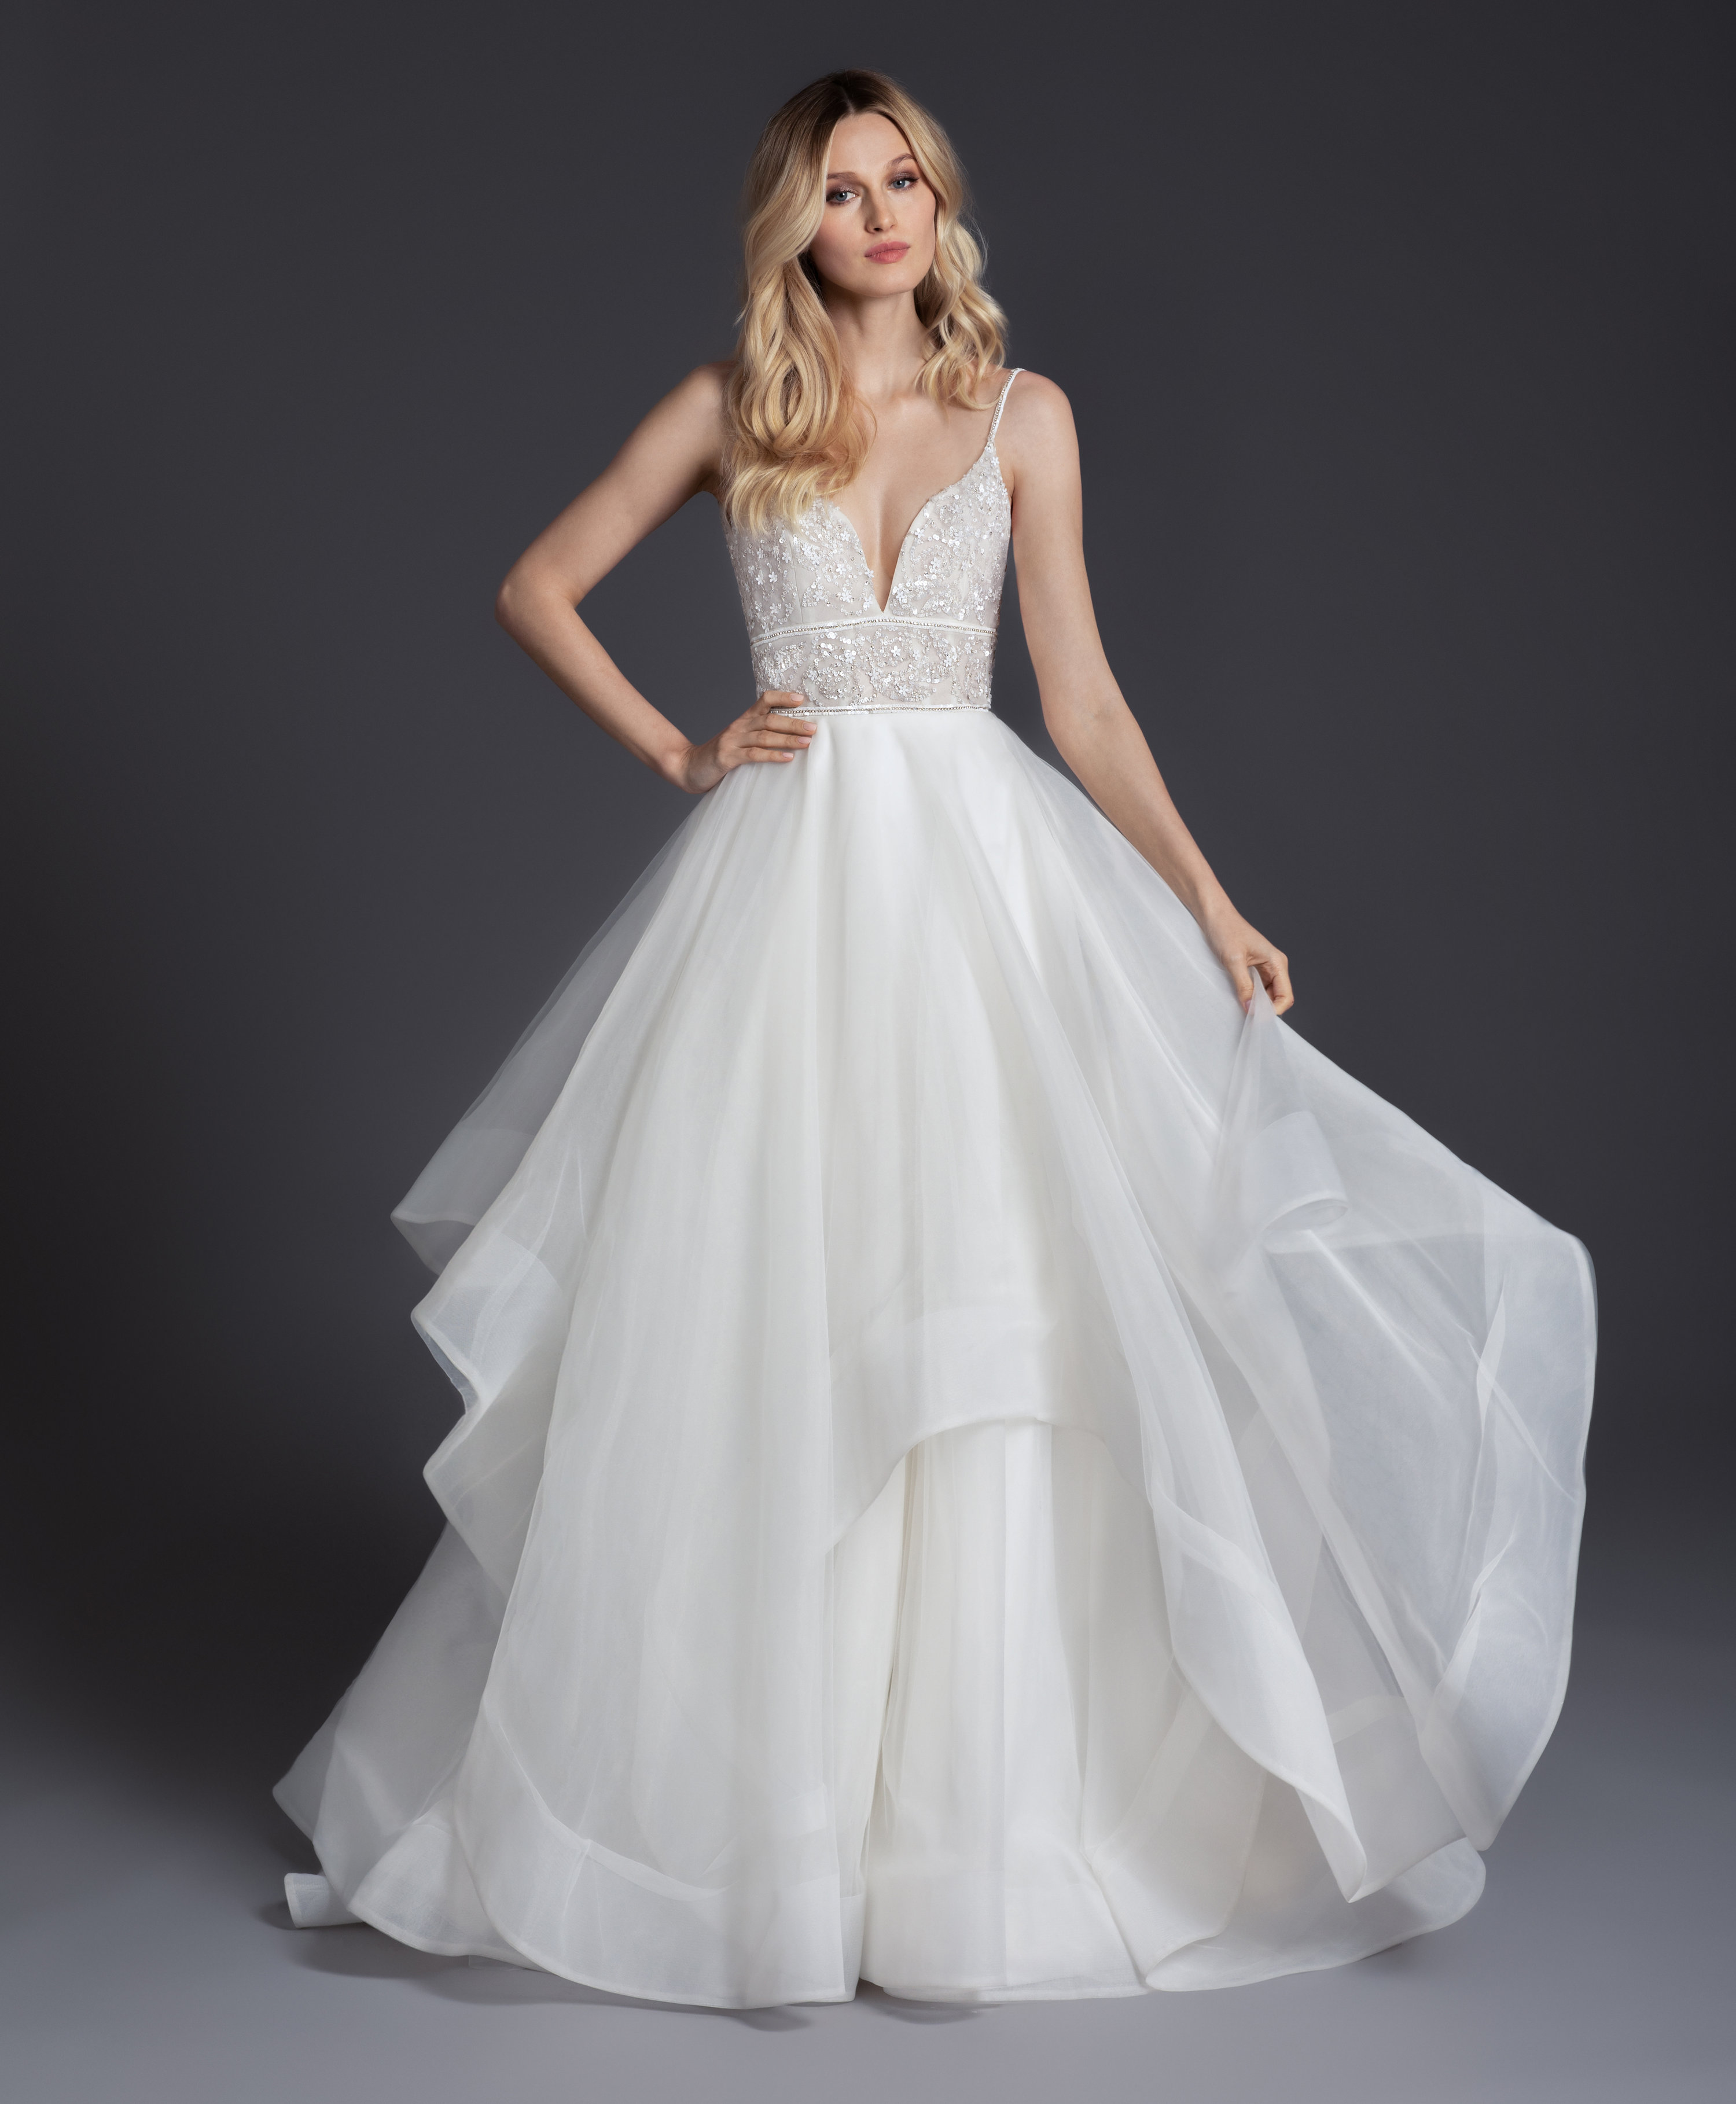 Bridal Gowns and Wedding Dresses by JLM Couture - Style 1912 Phoenix